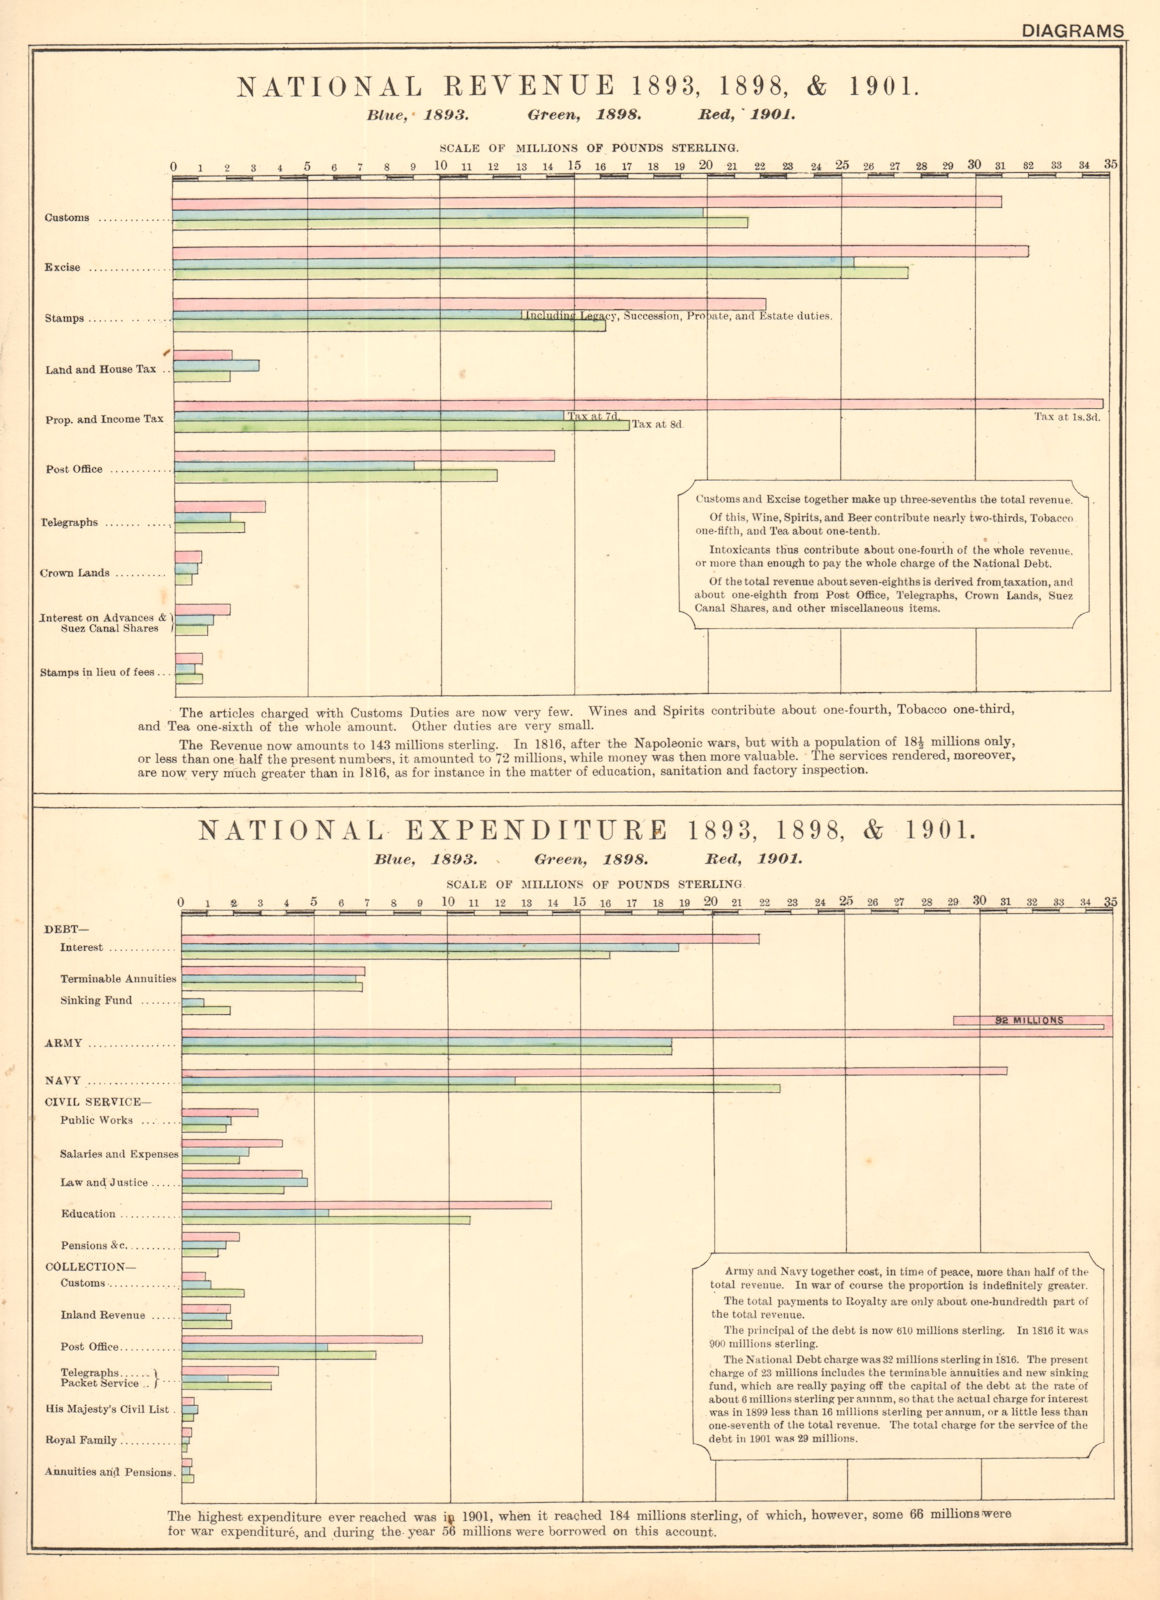 UK GOVERNMENT TAX RECEIPTS & EXPENDITURE in 1888, 1893 & 1898. BACON 1904